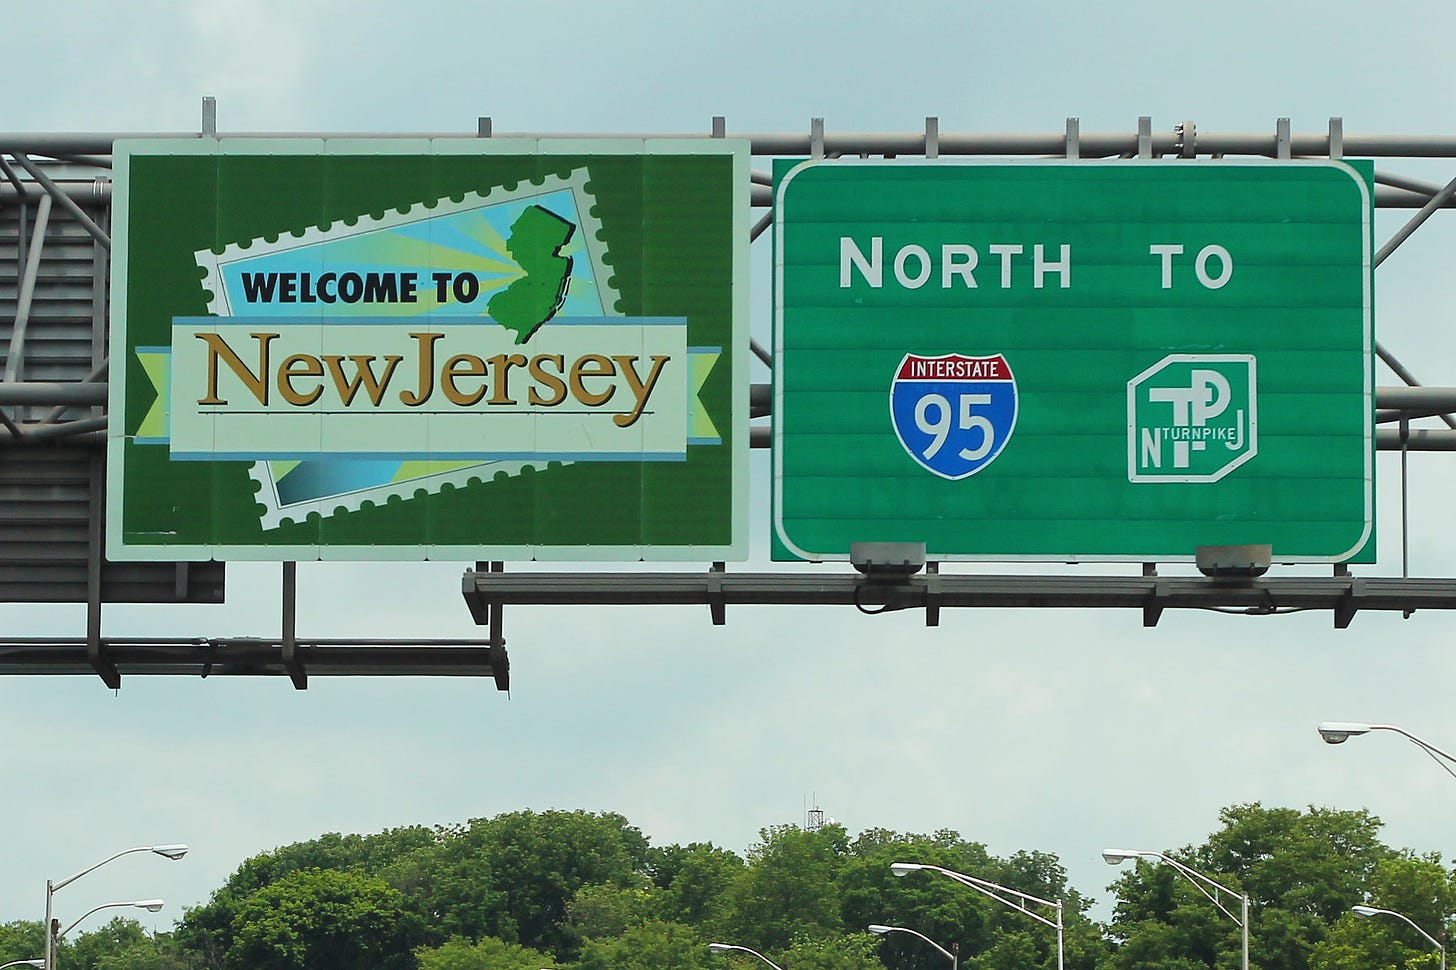 'Welcome to New Jersey' sign